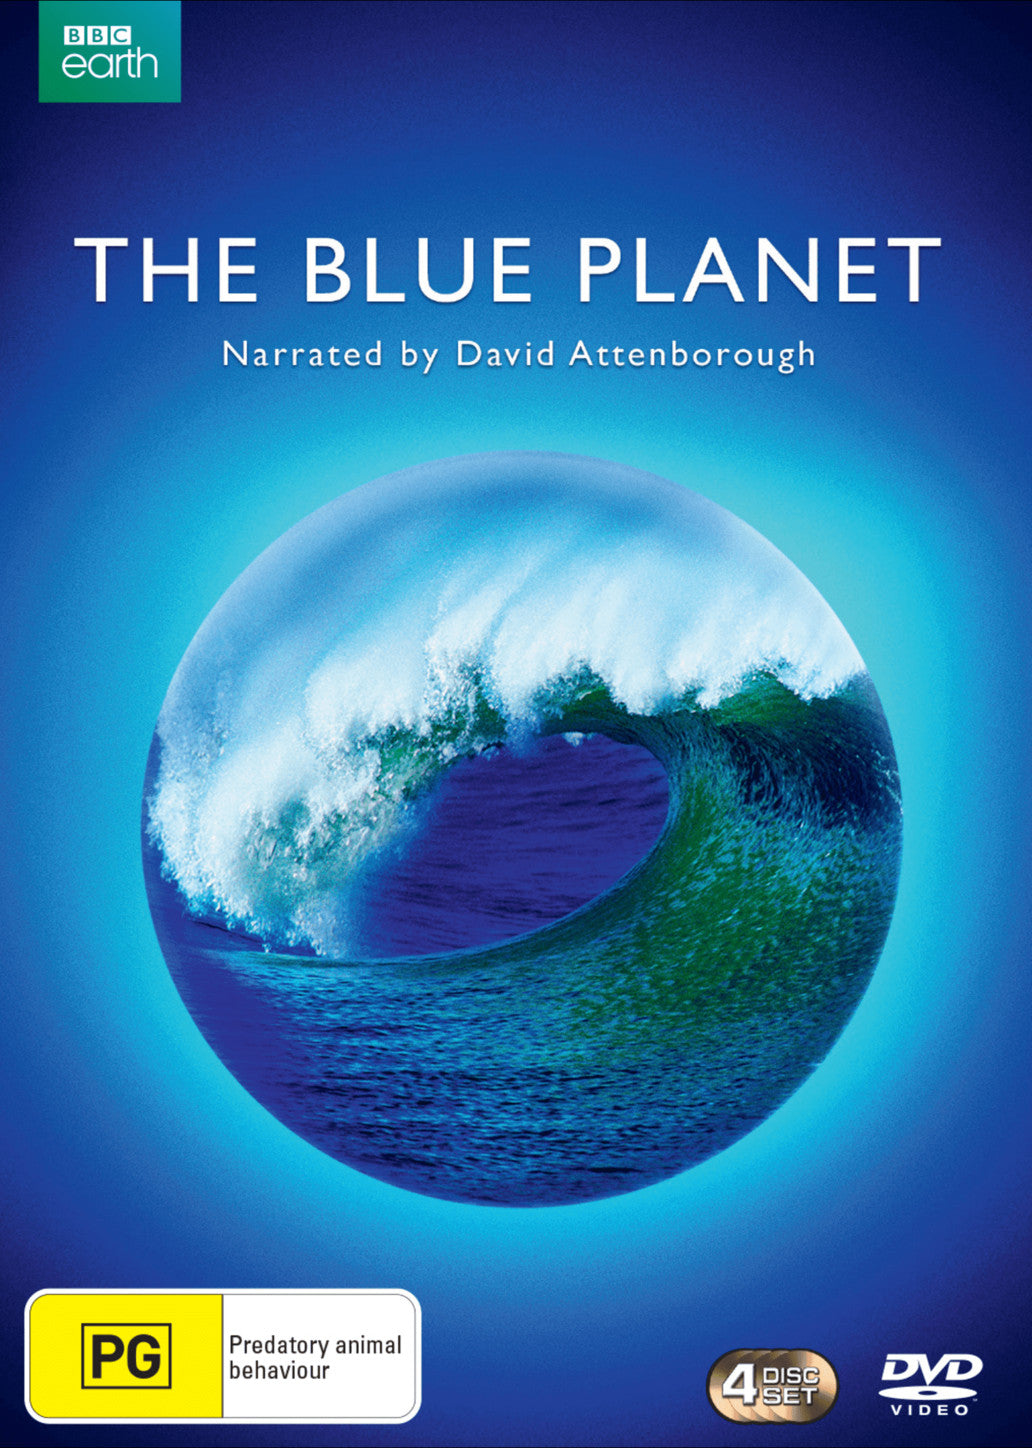 BLUE PLANET, THE